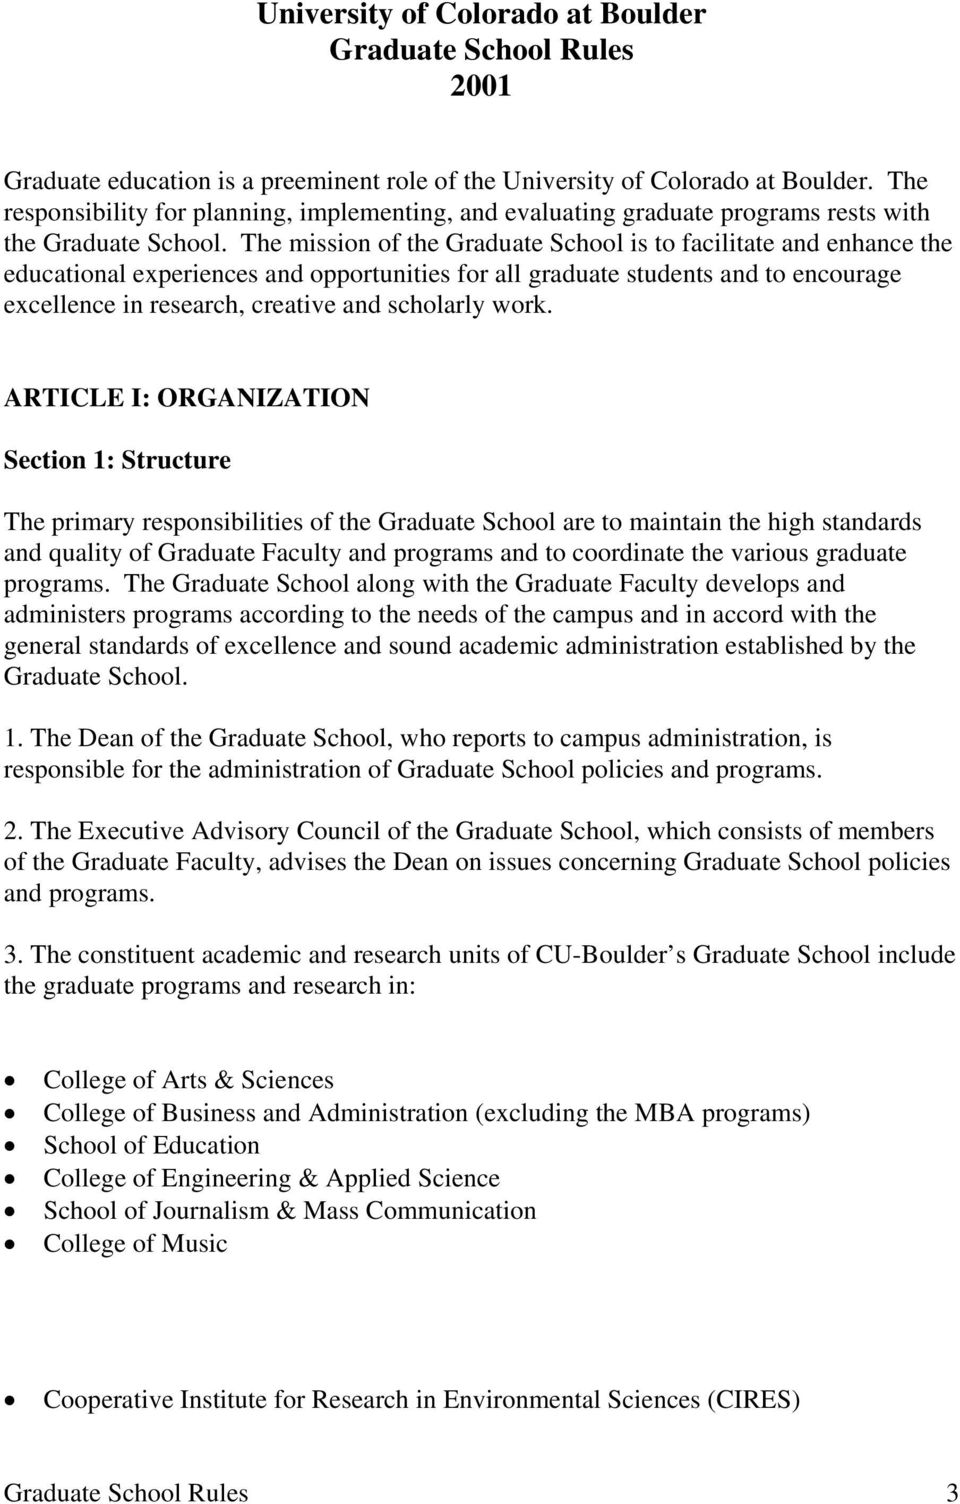 The mission of the Graduate School is to facilitate and enhance the educational experiences and opportunities for all graduate students and to encourage excellence in research, creative and scholarly